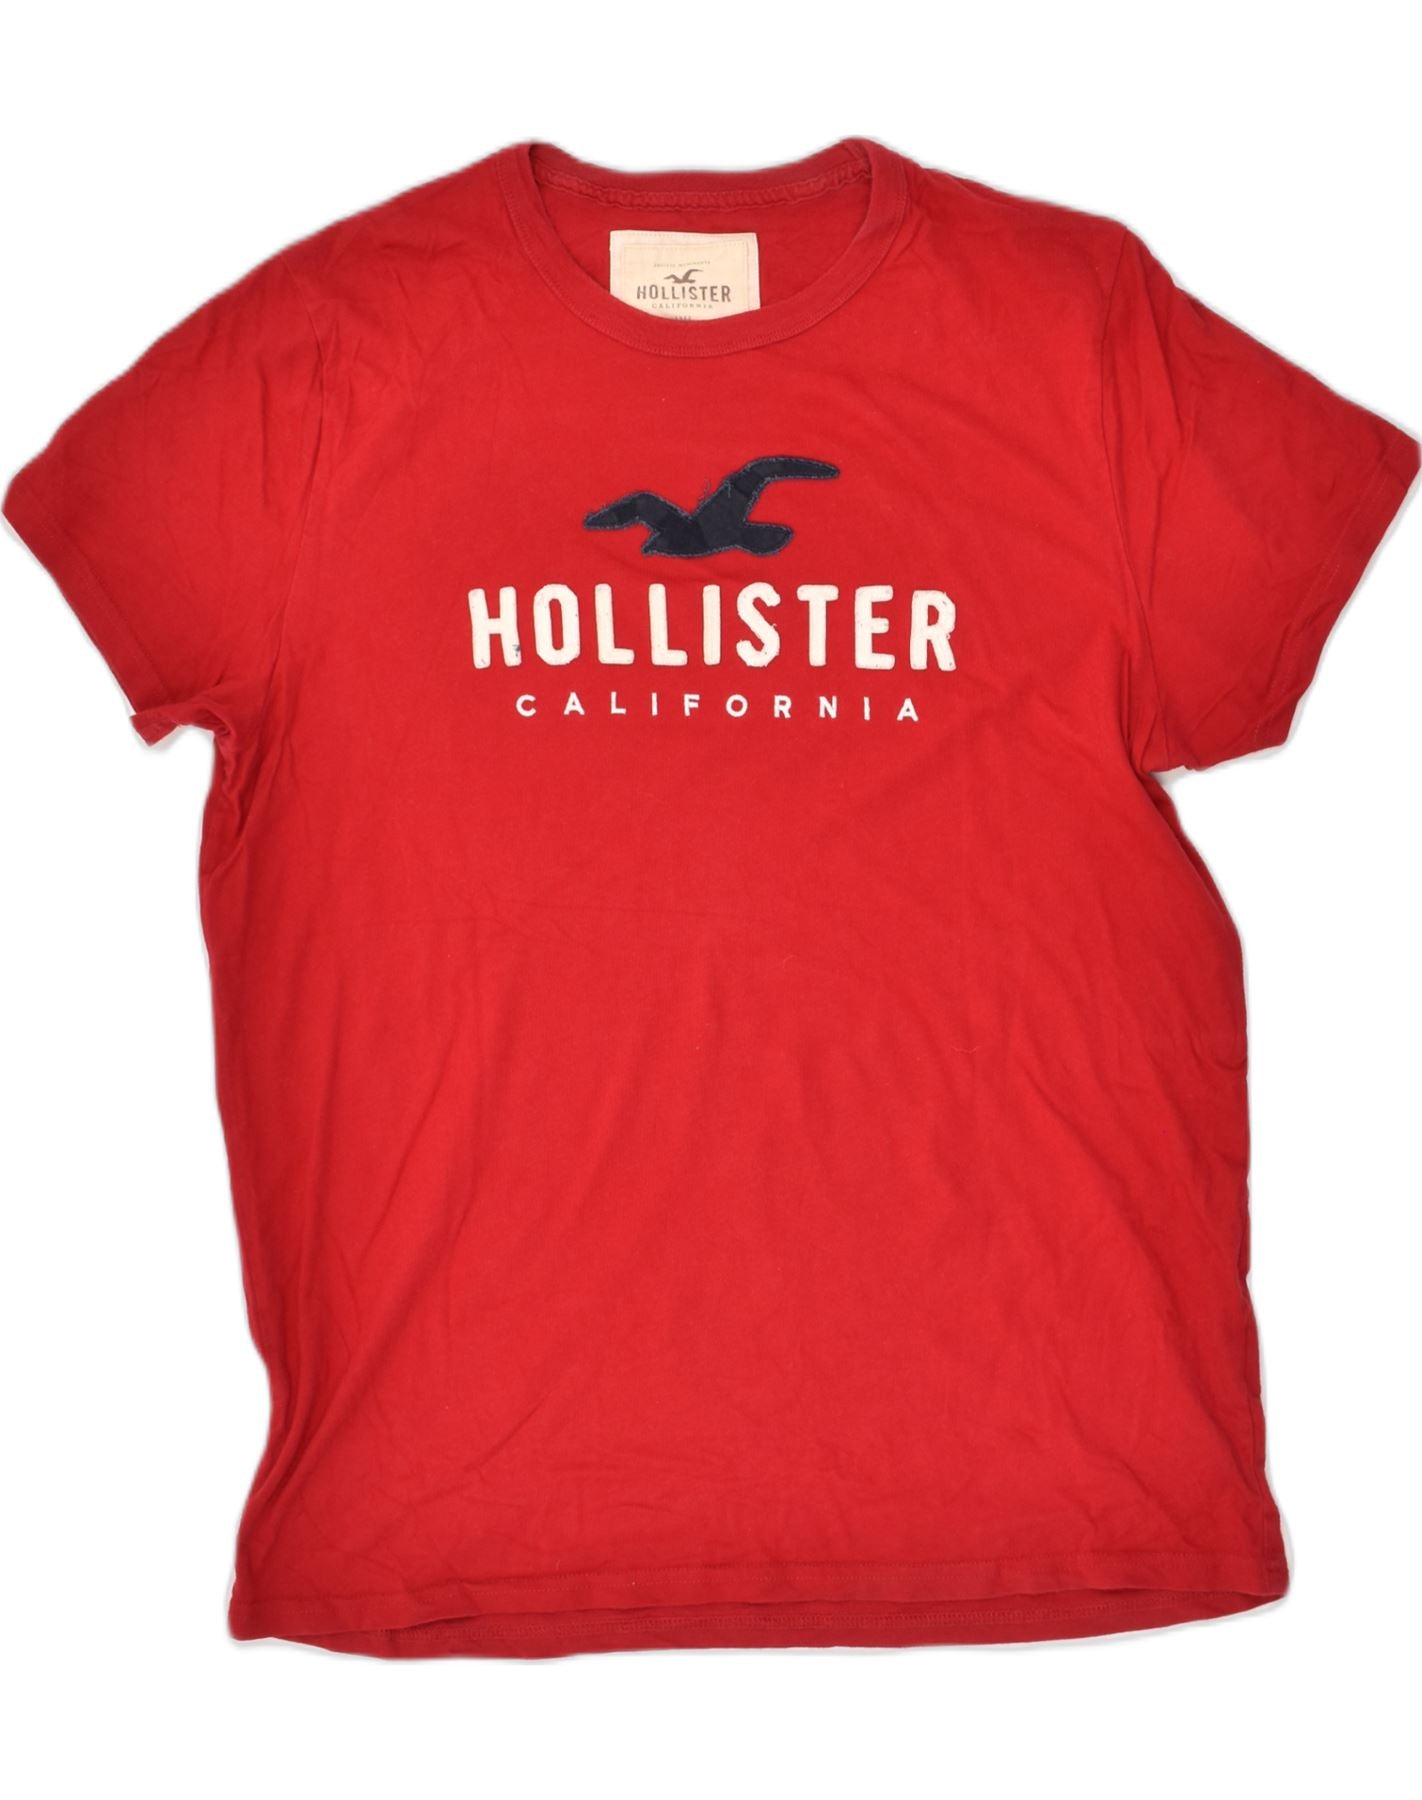 HOLLISTER Mens Graphic T-Shirt Top XL Red Cotton, Vintage & Second-Hand  Clothing Online